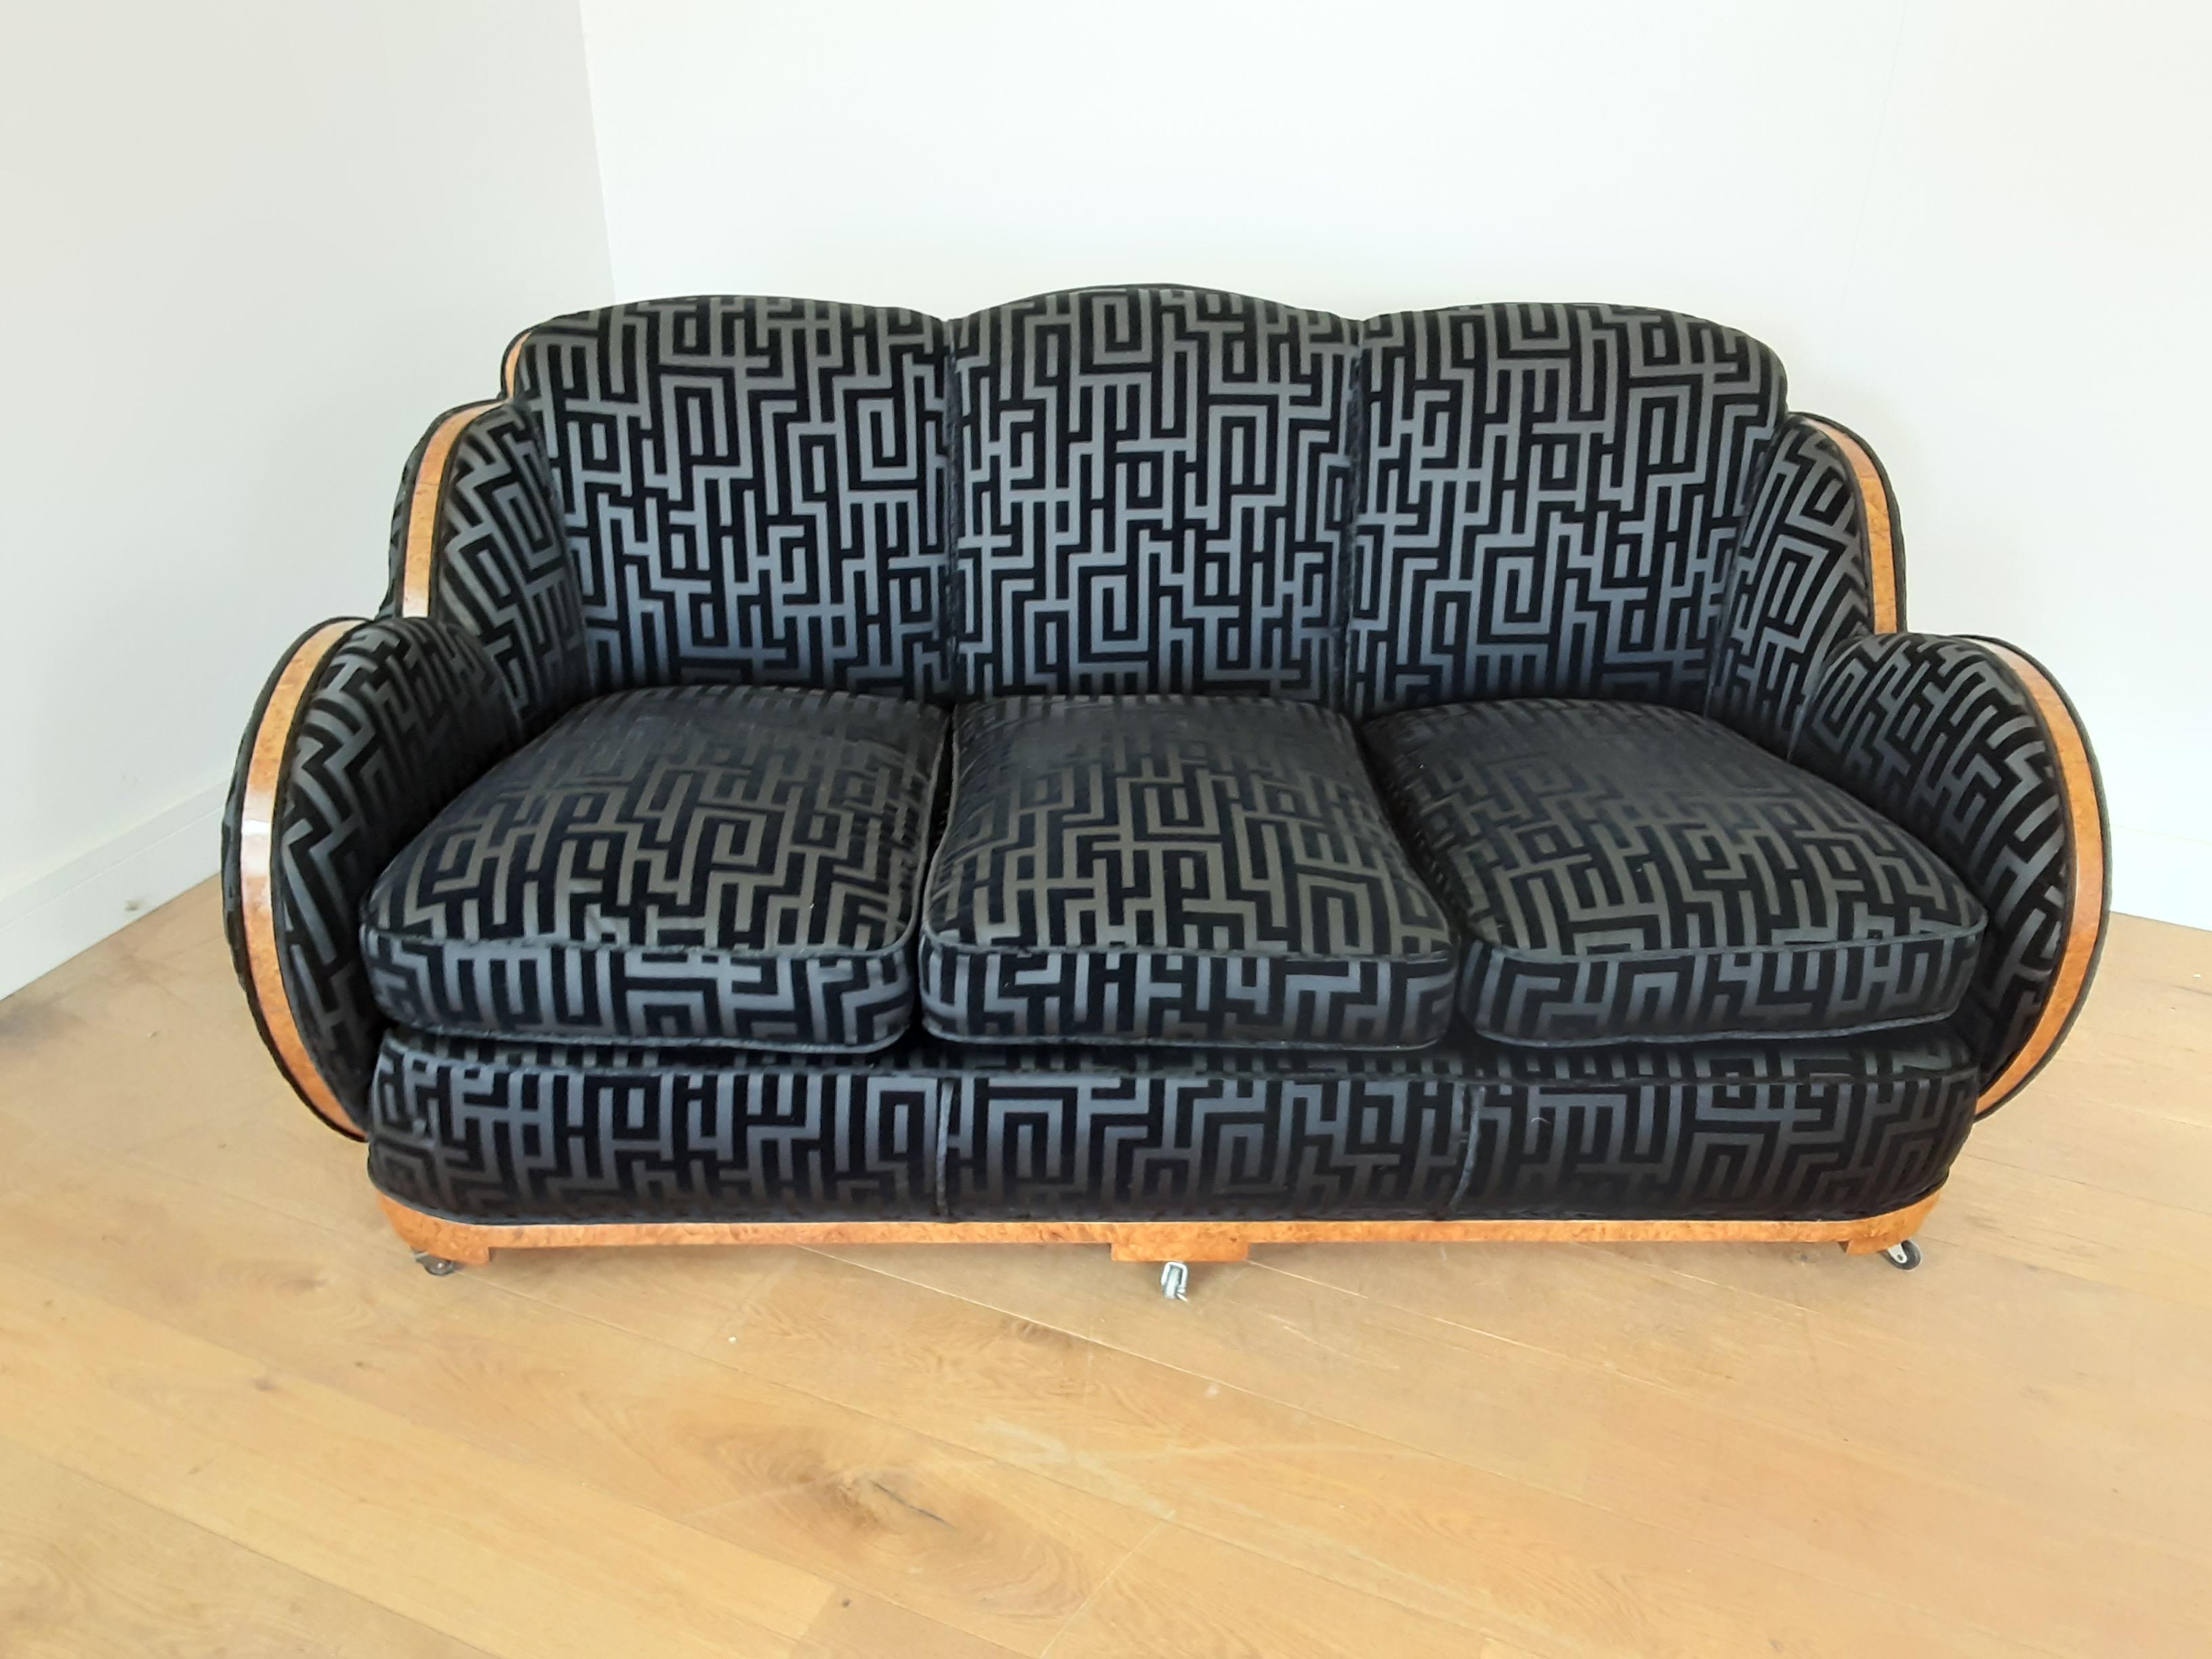 British Art Deco Cloud Back Sofa by Epstein in an Armani Style Fabric circa 1930 For Sale 13